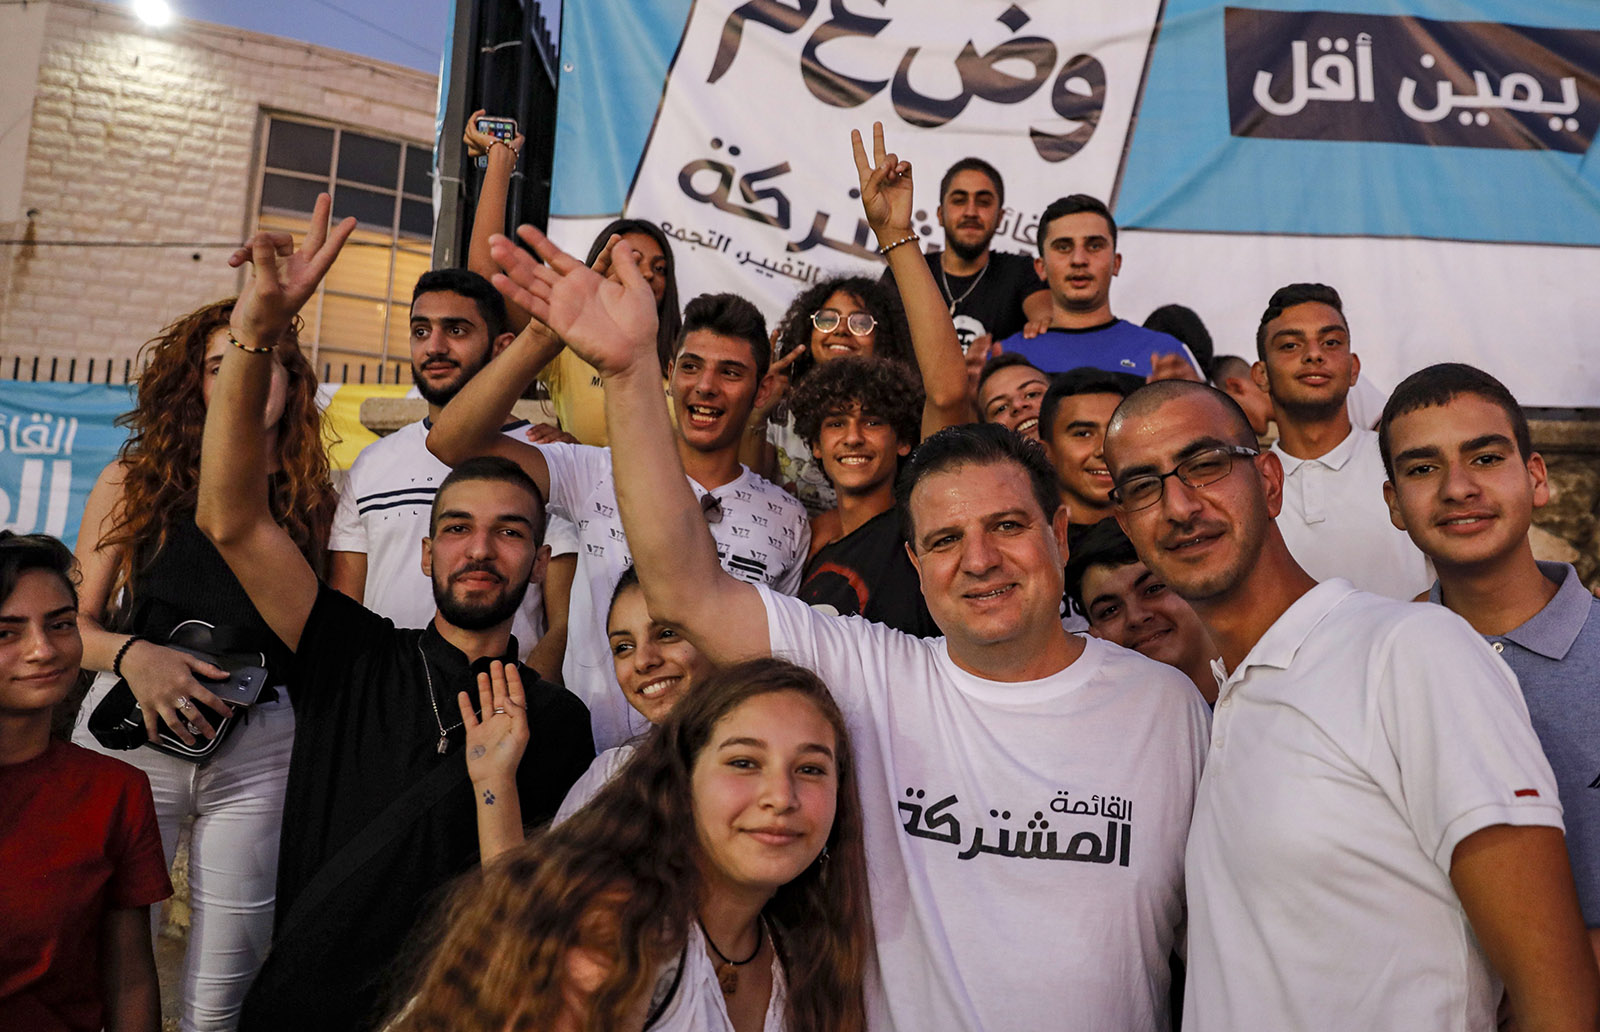 The Israeli-Arab politician Ayman Odeh (front, third from right) at a campaign rally for the Joint List alliance of Arab parties ahead of Israel’s September election, Kafr Yasif, Israel, August 23, 2019